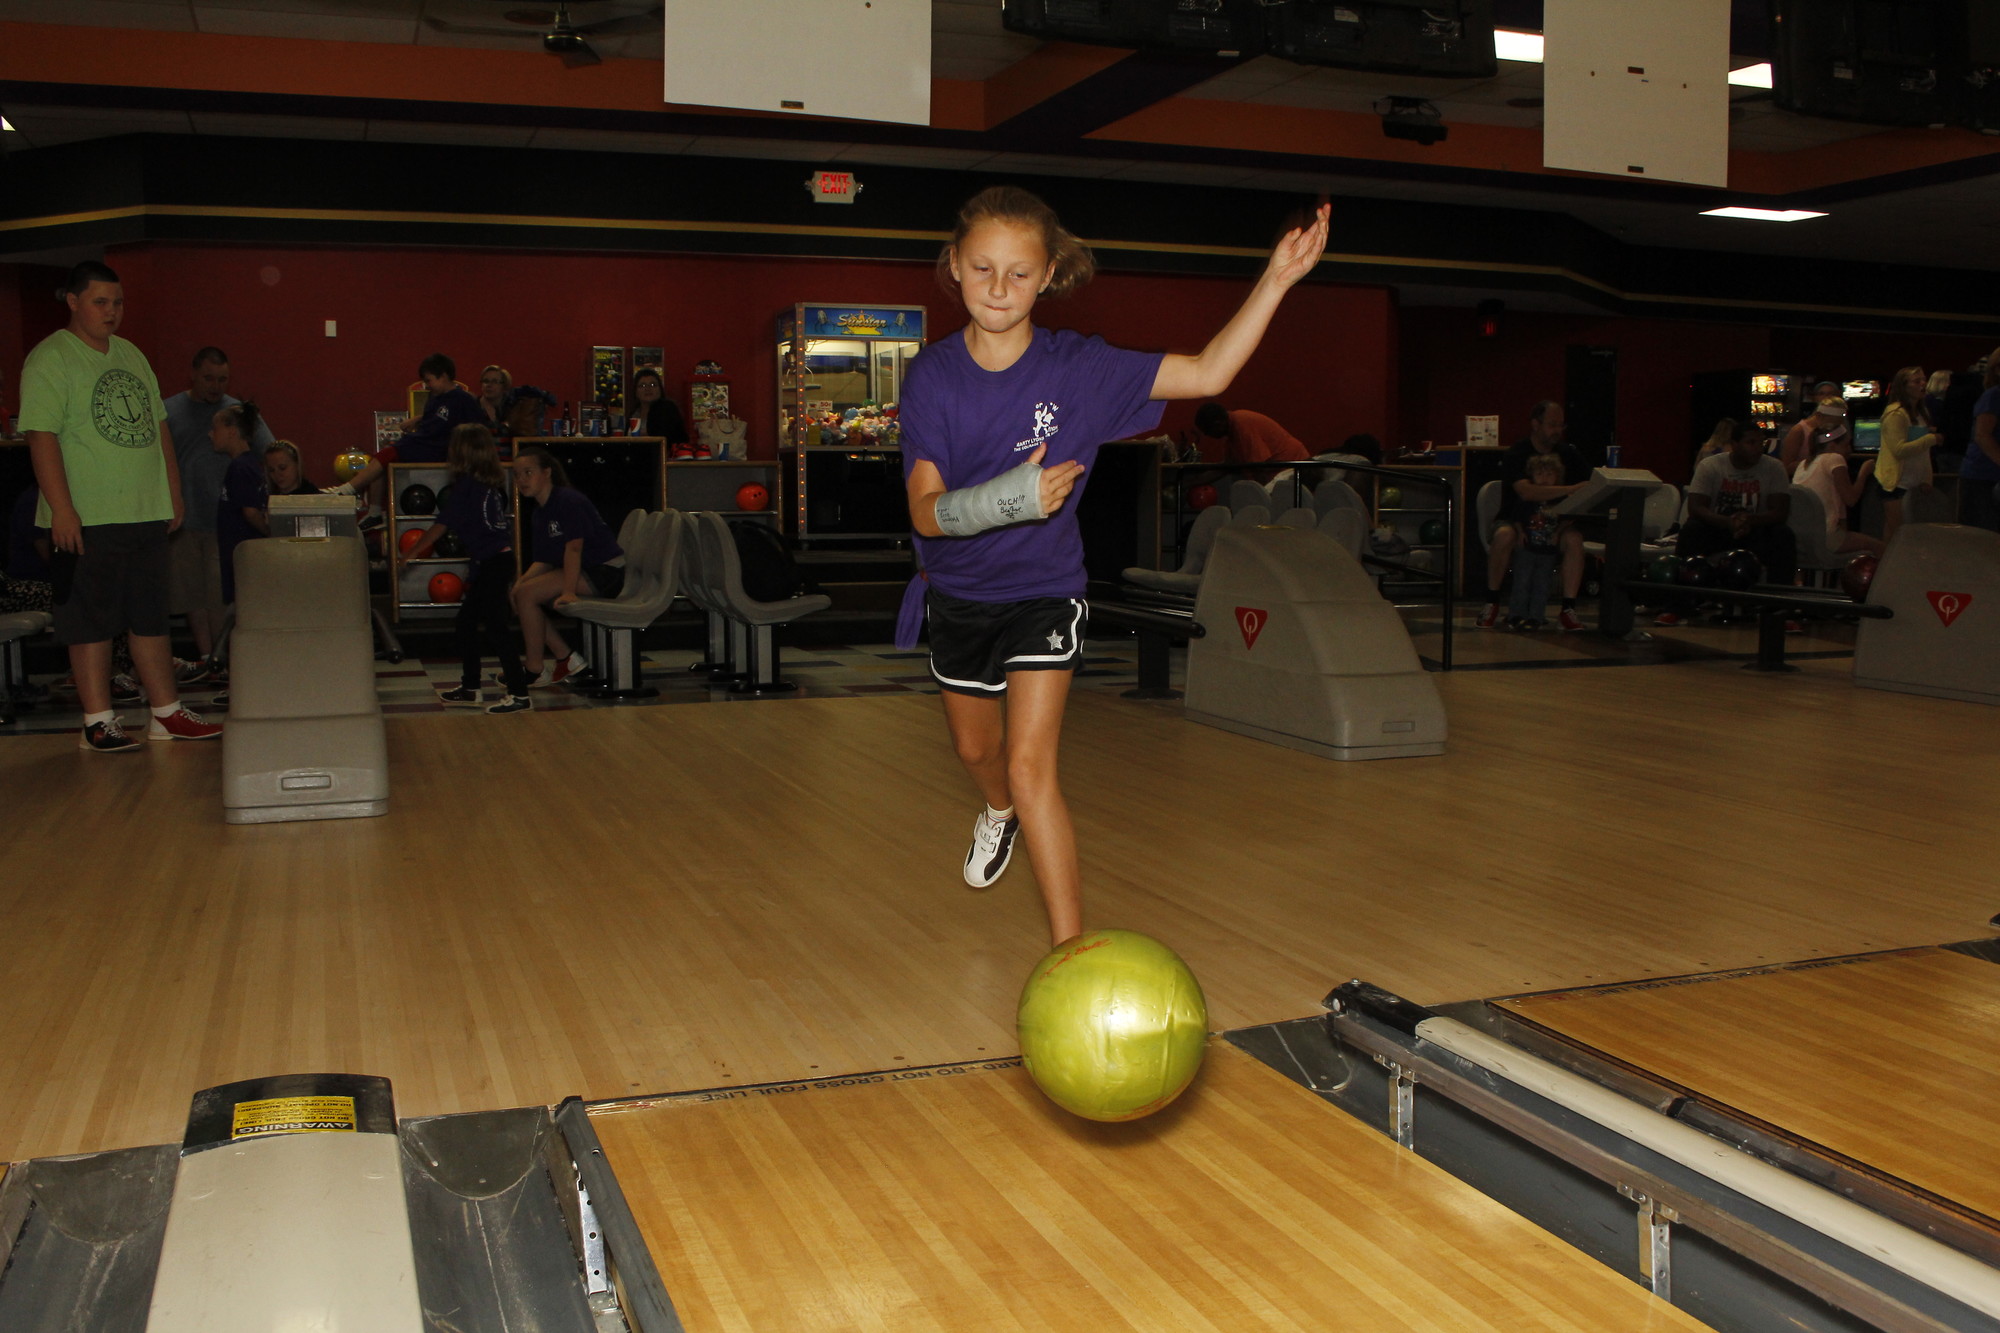 Emma Bollinger, 9, who won a pair of headphones in the night’s raffle draw, fired away at the 20th Annual Bowling for Wishes charity event last Saturday.